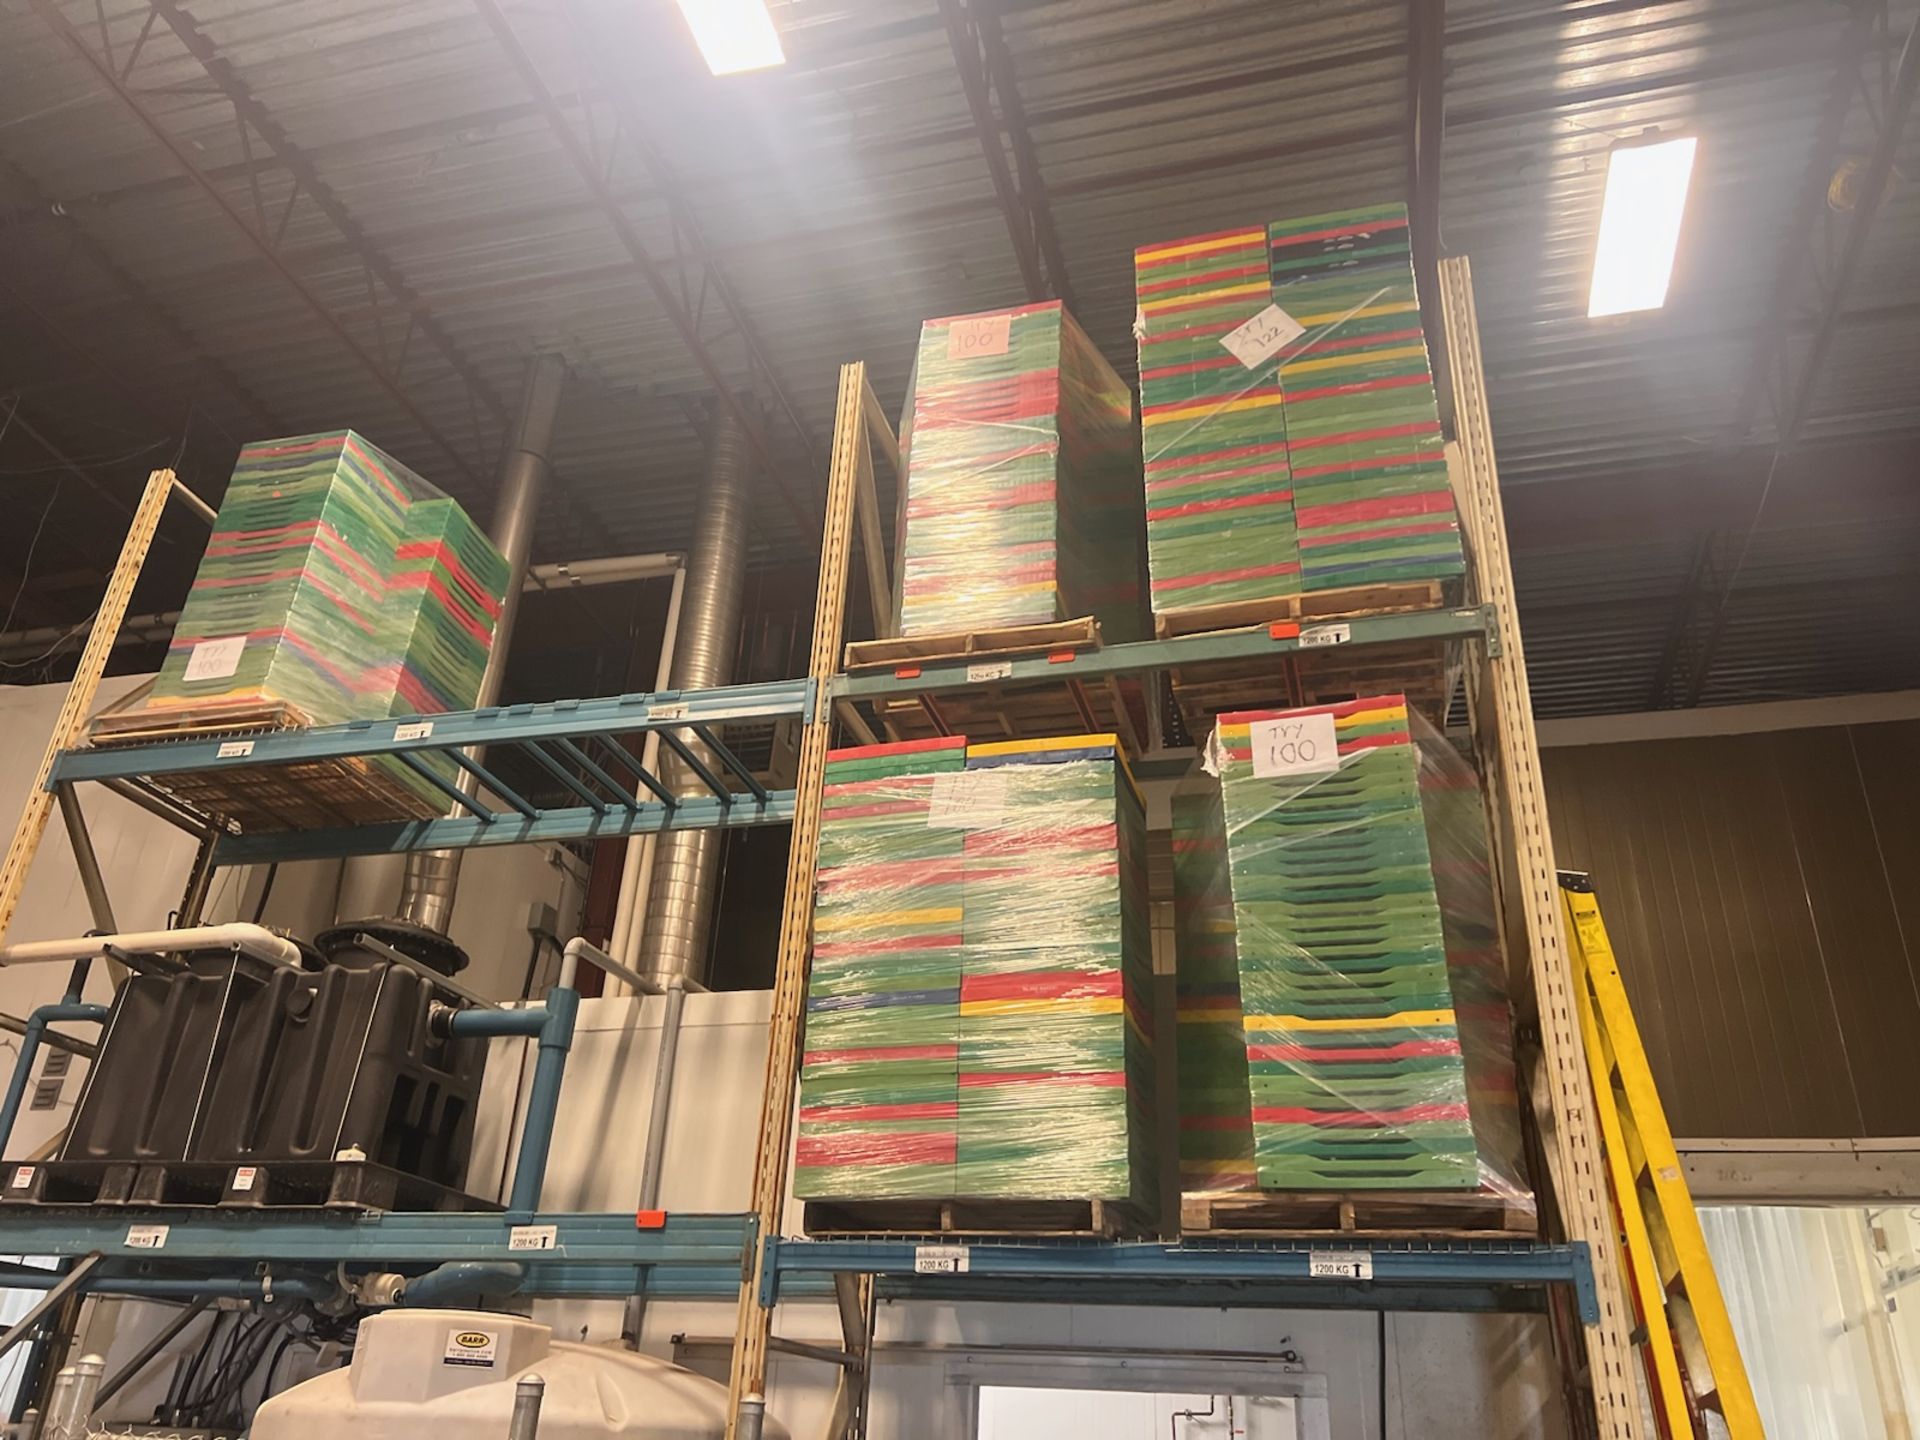 Lot of Bread Trays, 5 Pallets Total Count 422